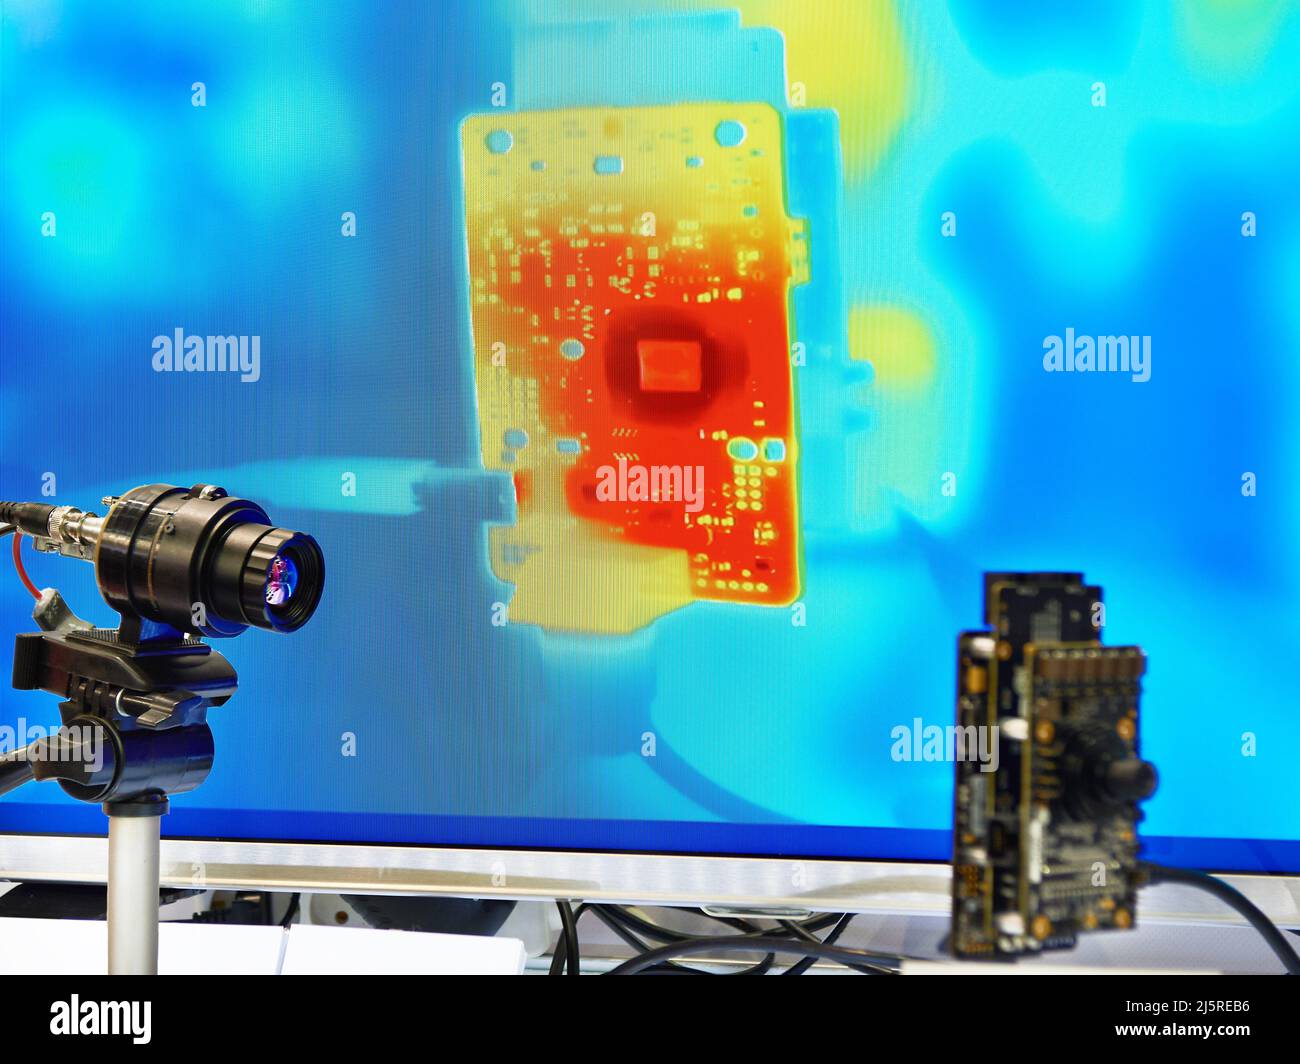 Infrared camera and monitoring device Stock Photo